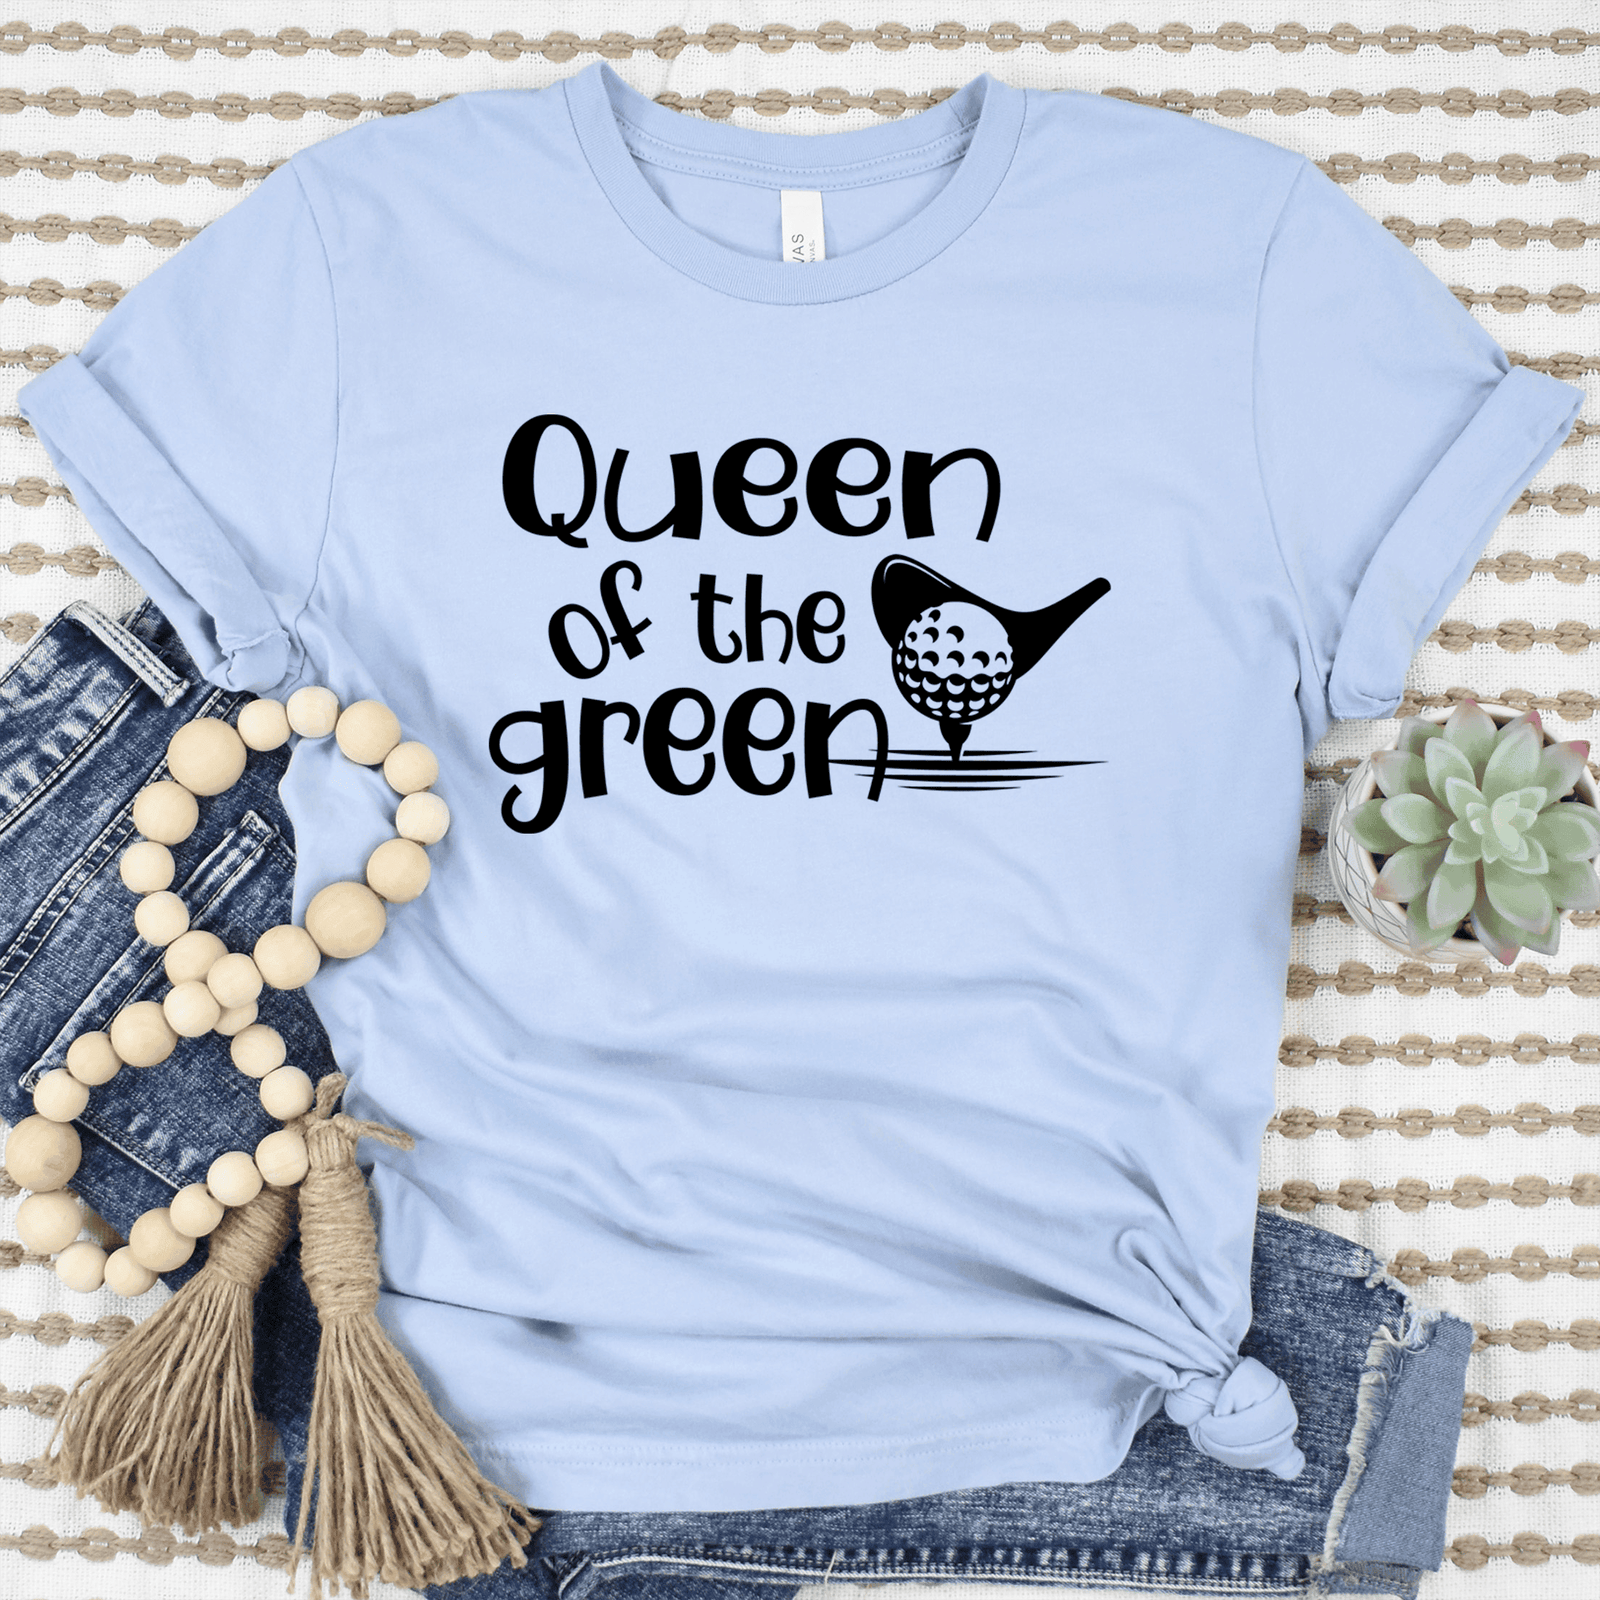 Womens Light Blue T Shirt with Queen-Of-The-Green design